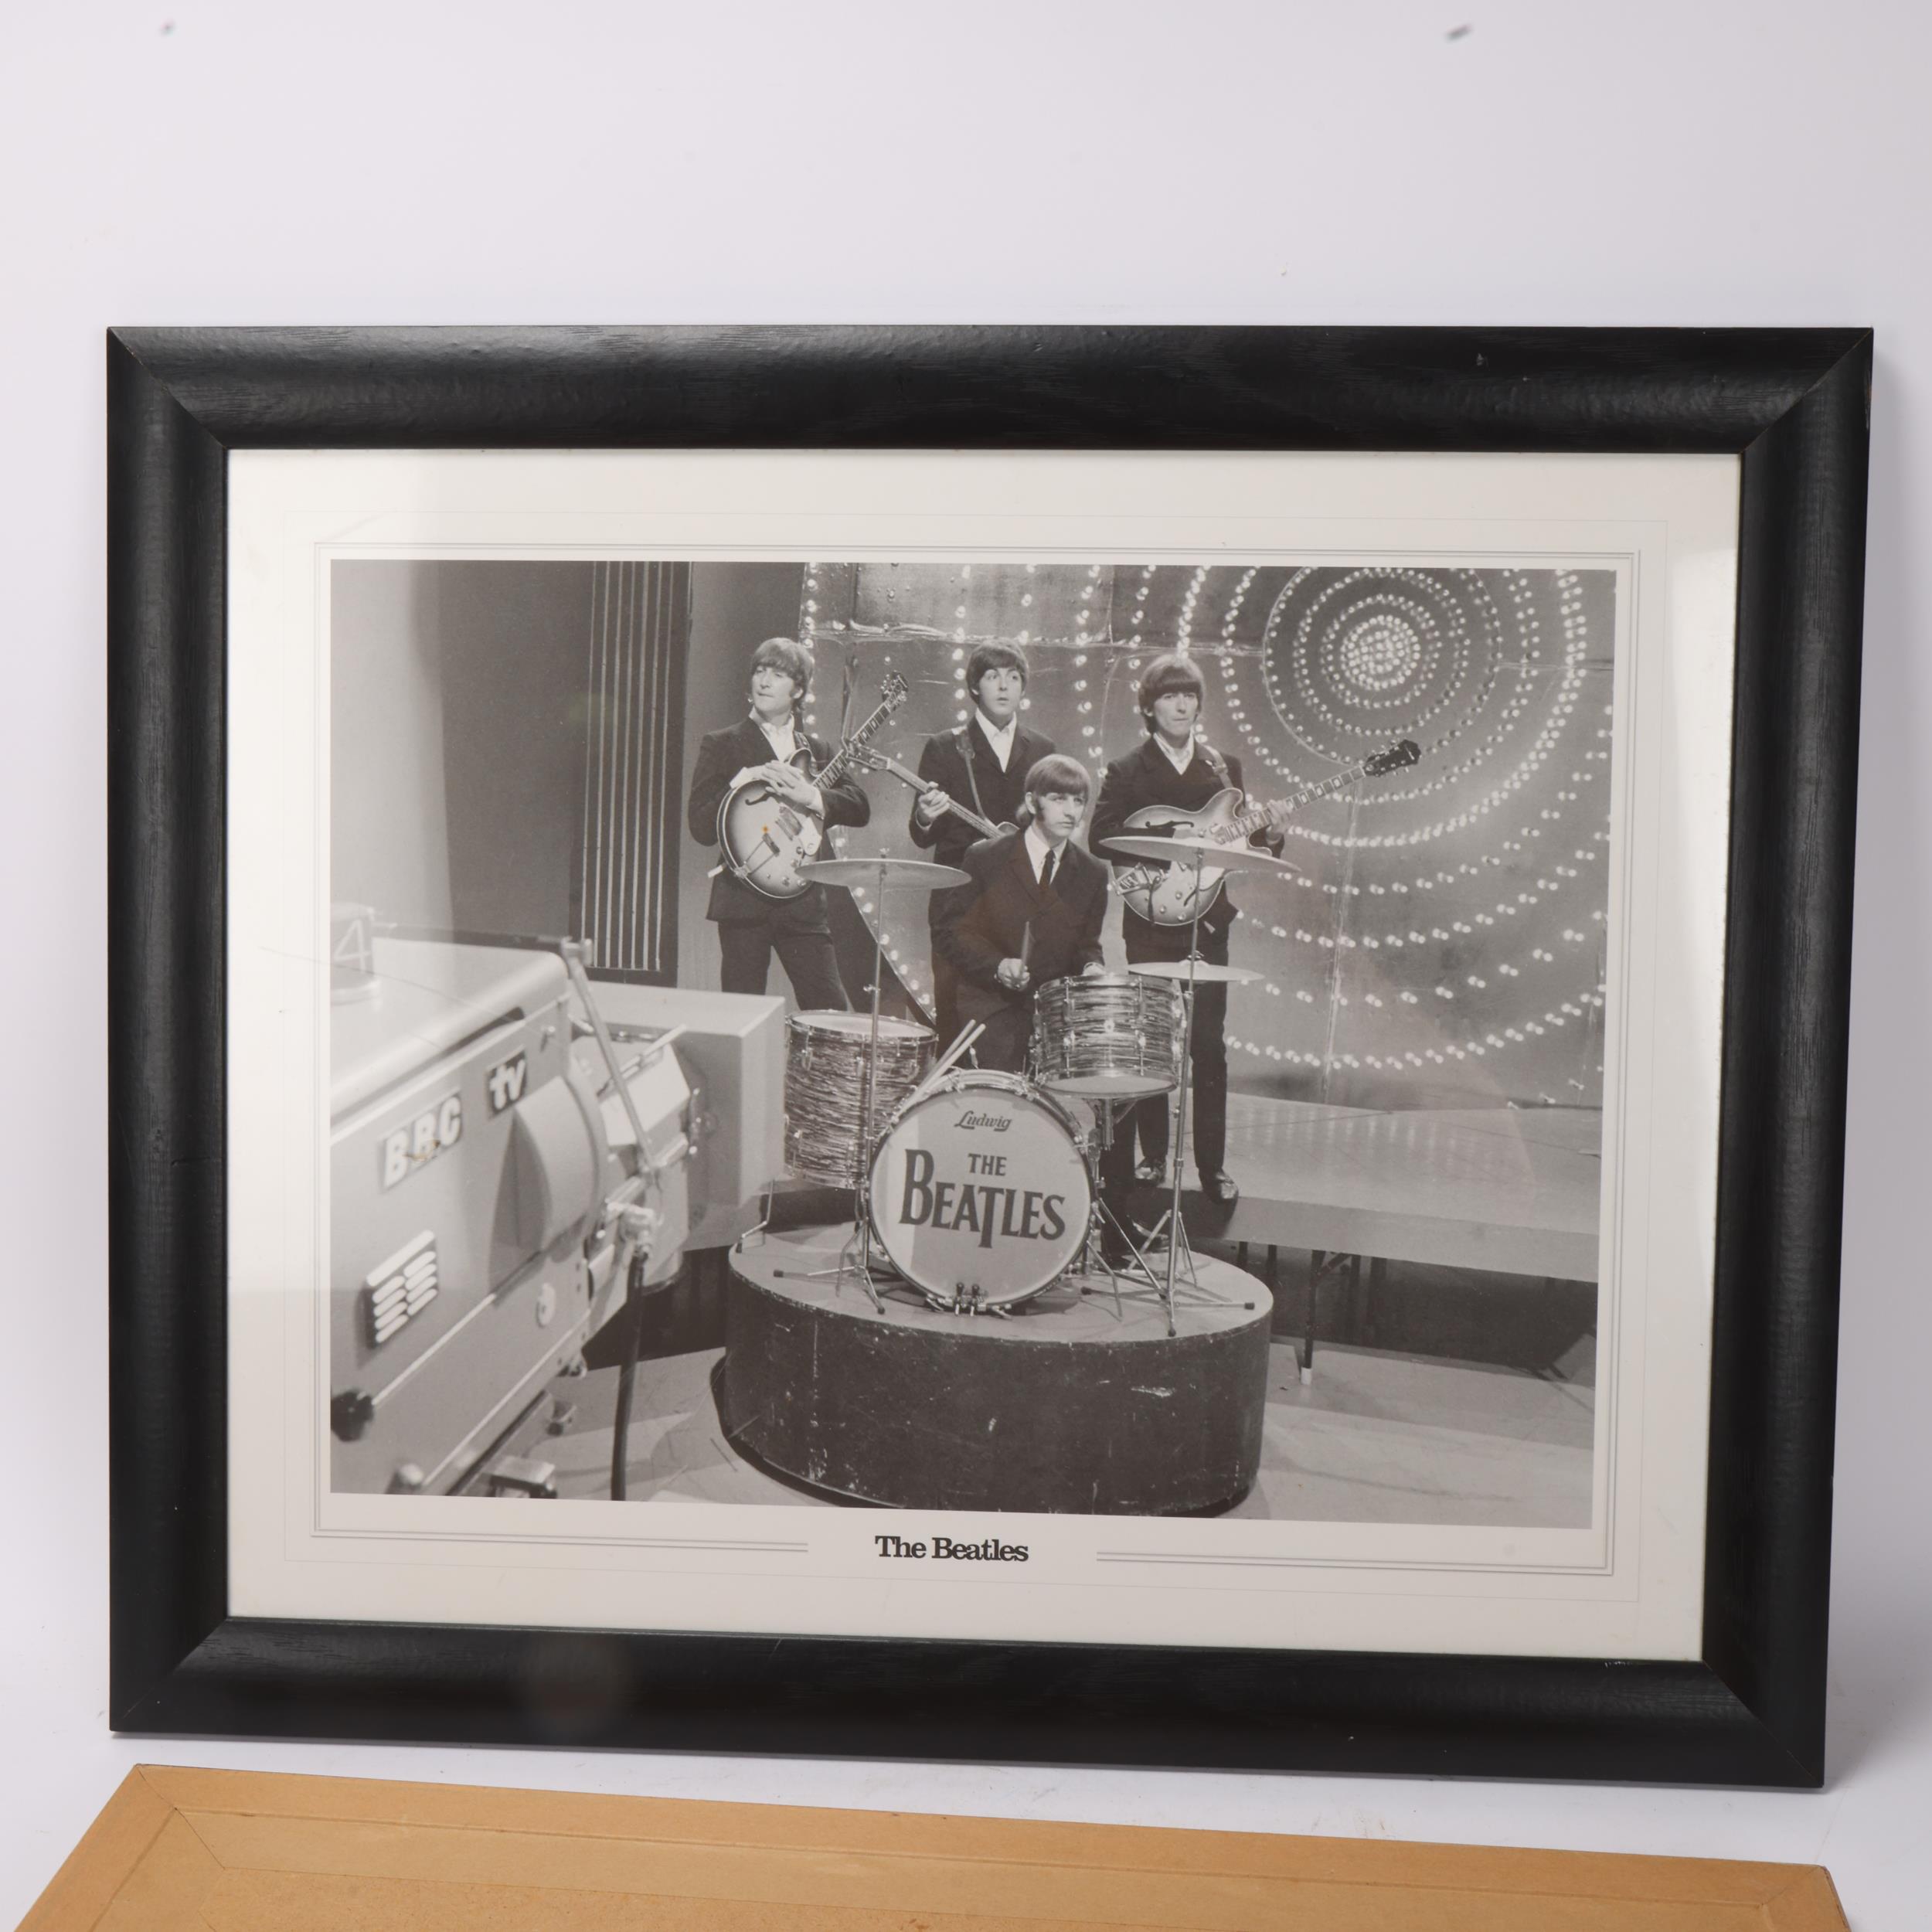 2 photographic prints of The Beatles, largest image 42 x 32cm, both framed Good condition - Image 3 of 3